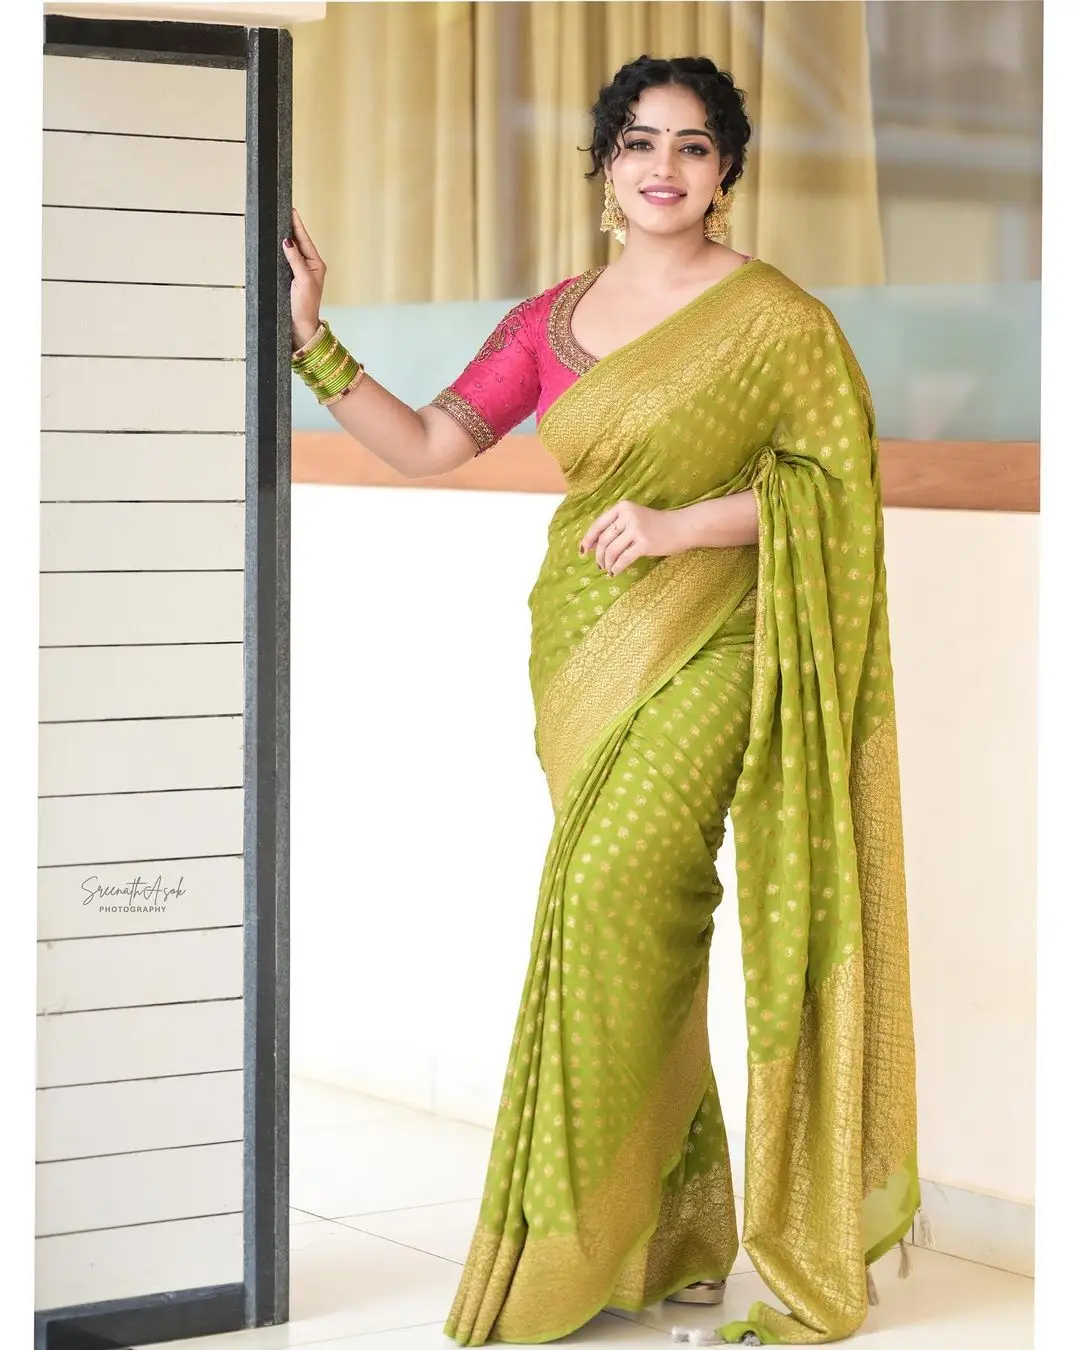 MALAVIKA MENON IN SOUTH INDIAN TRADITIONAL GREEN SAREE RED BLOUSE 3